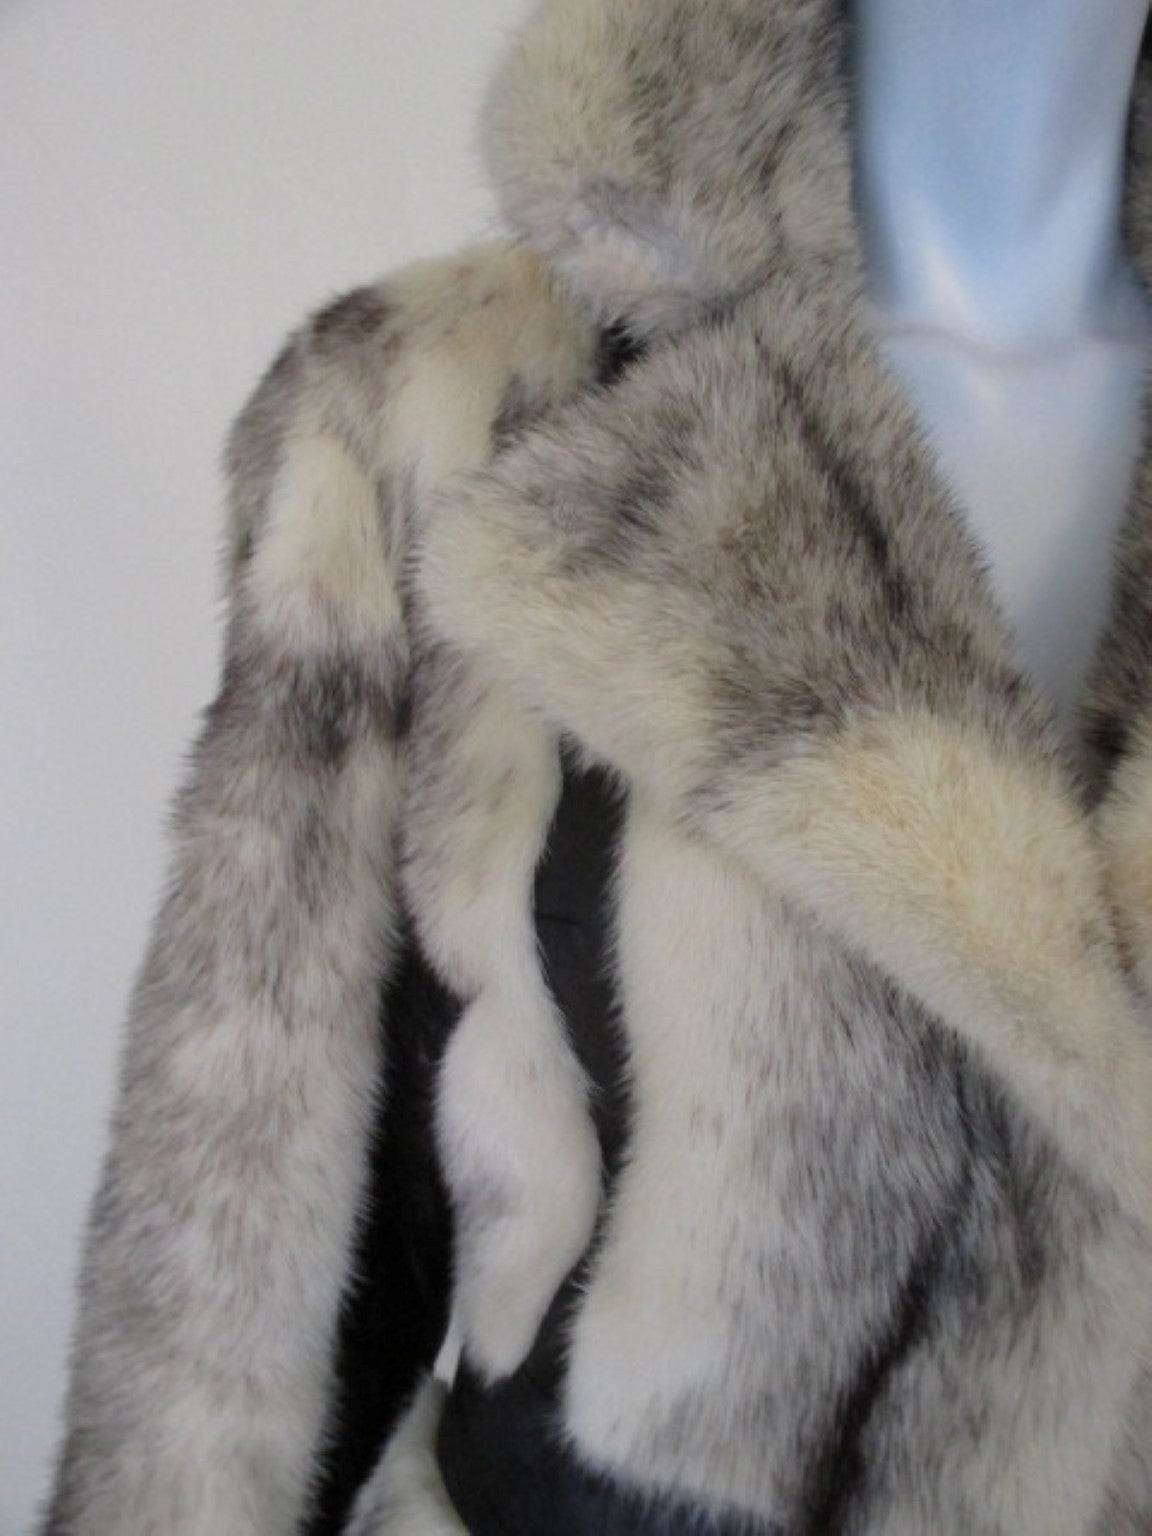 This vintage coat is made of creme color cross mink with black leather details.
The coat has 2 hooks an inside pocket and is from New Haven, Connecticut.
Former owner of the coat is Peggy K.(see photo)
The coat has 2 black leather line exterior